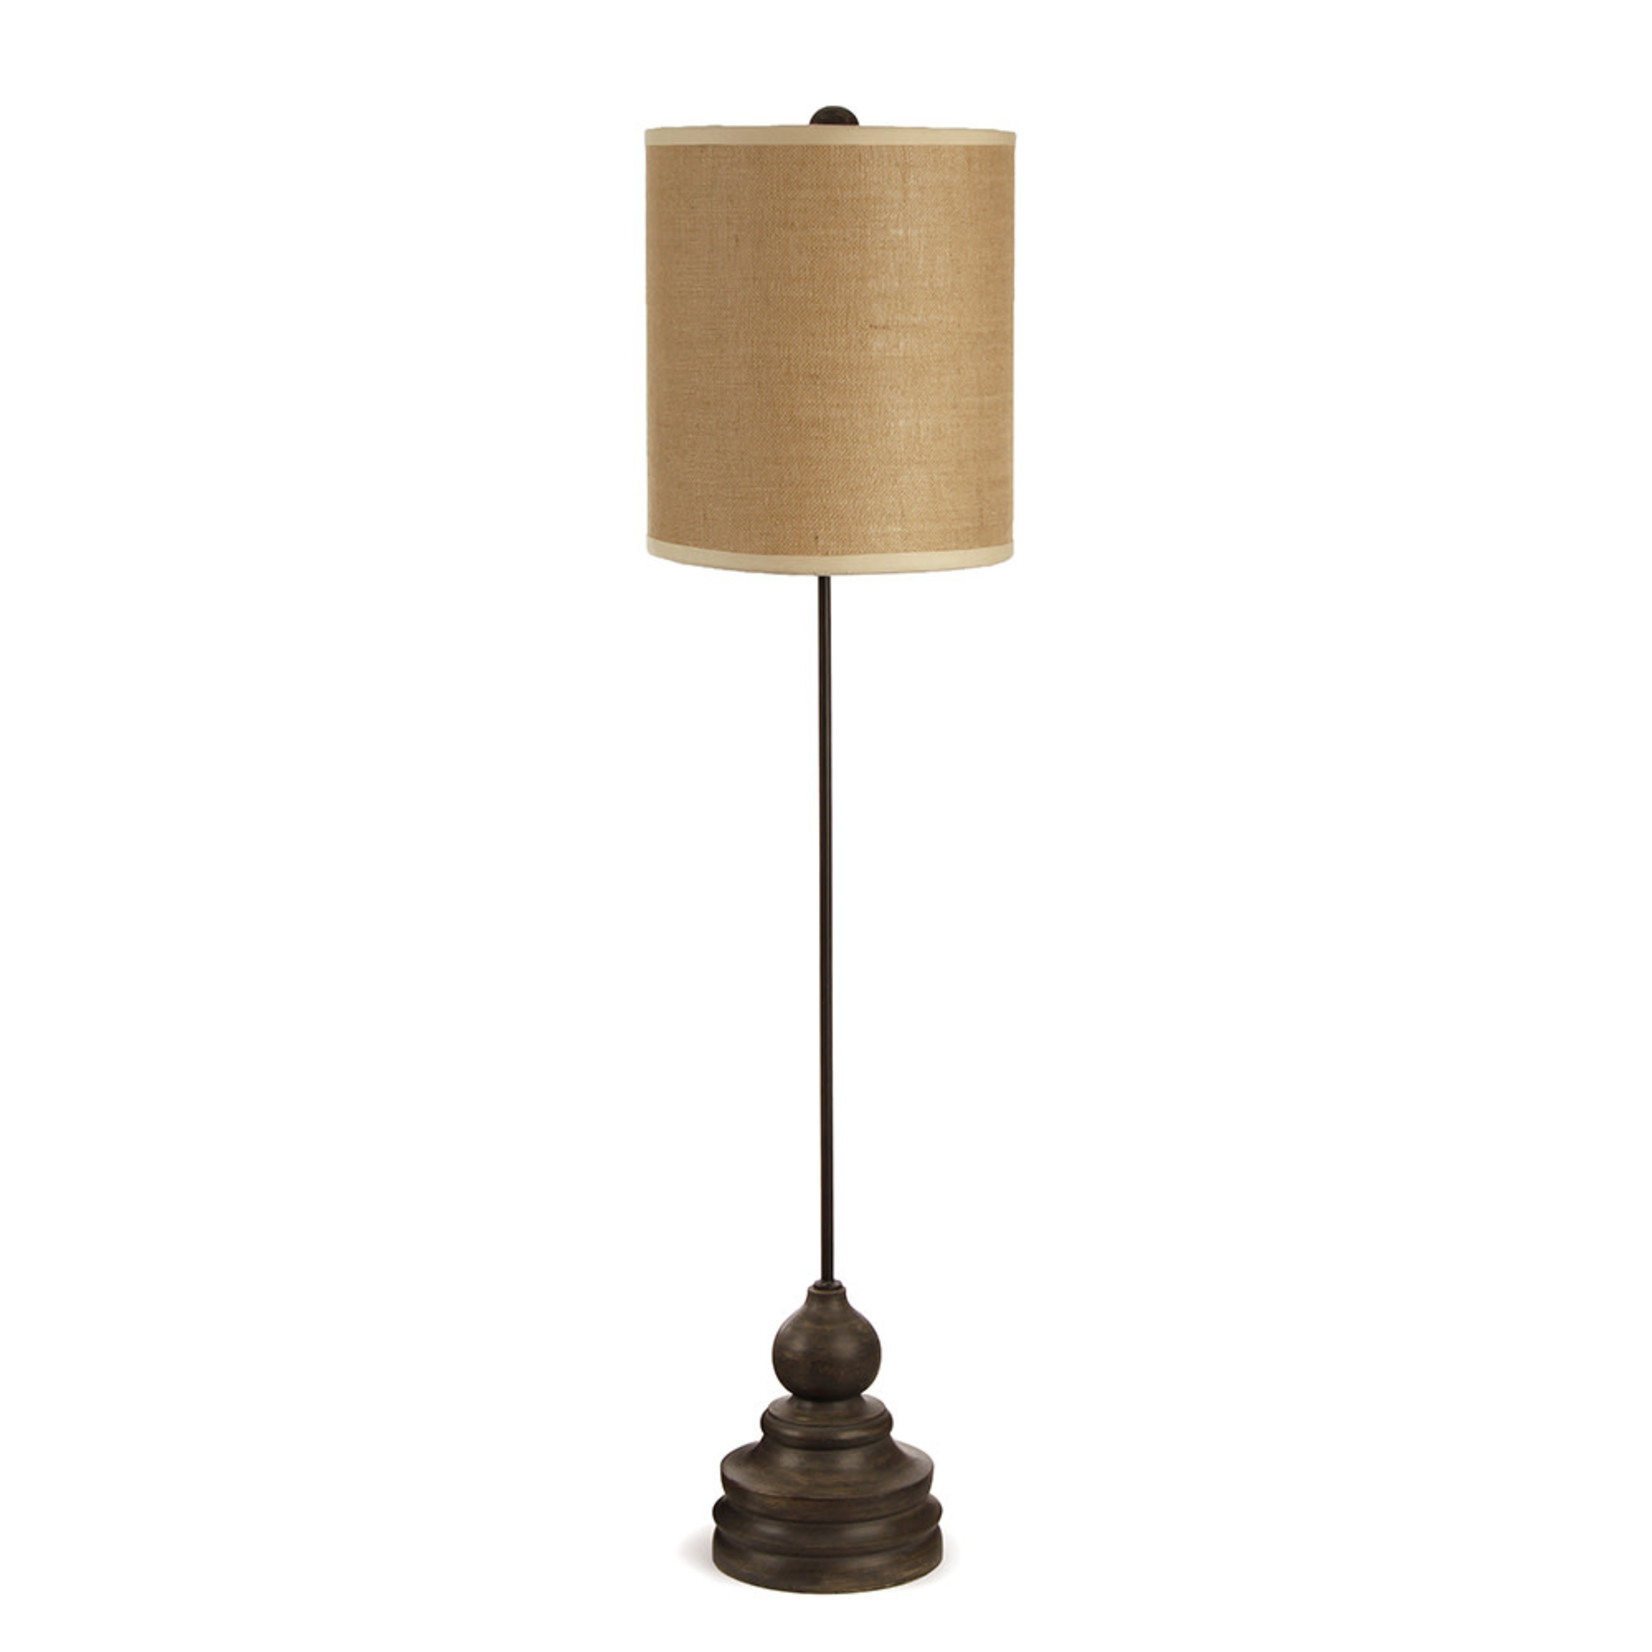 Napa Home and Garden Giselle Lamp